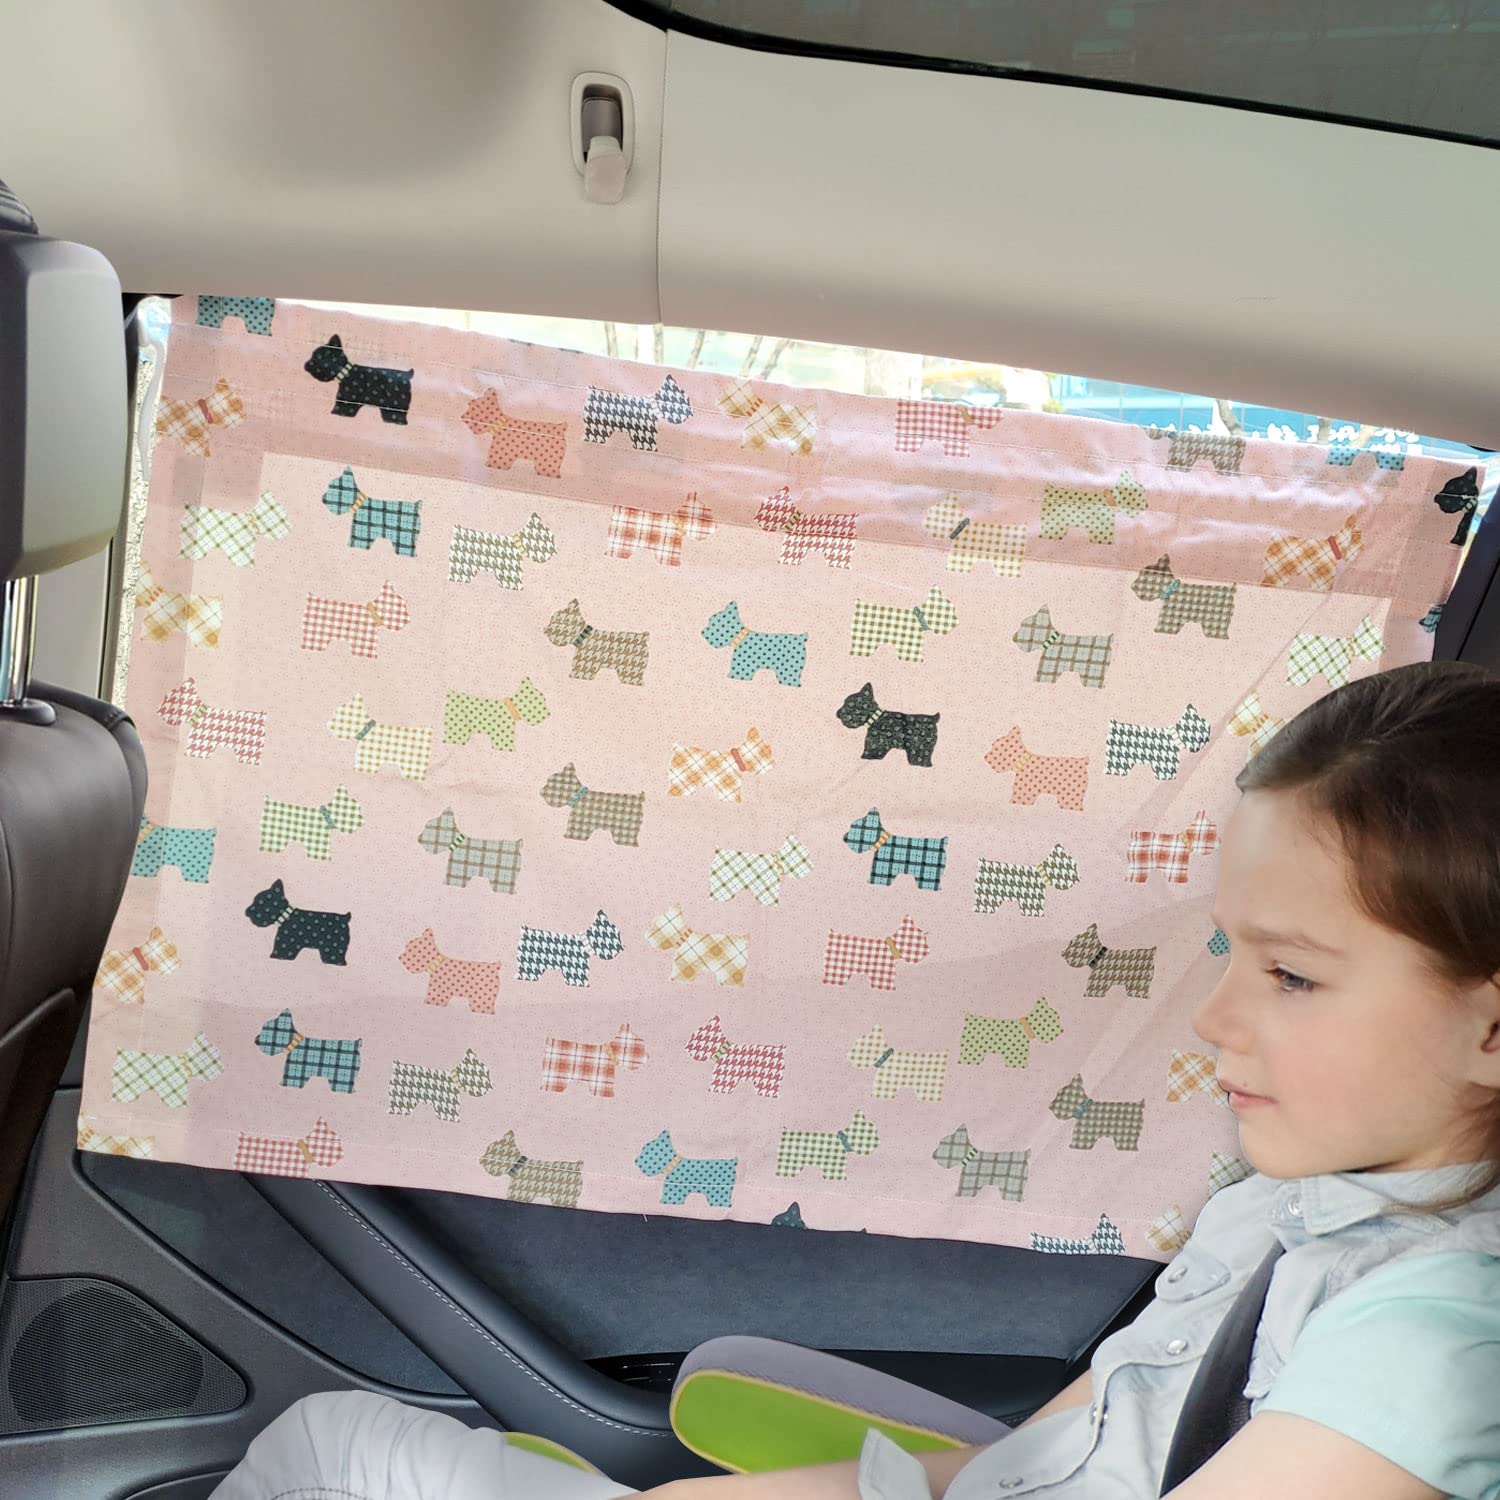 coneywave car Window Sun Shade for Baby, Kids, Adults, 100% cotton and Handmade, Washable, Adjustable Size Up to 275inch, Made i